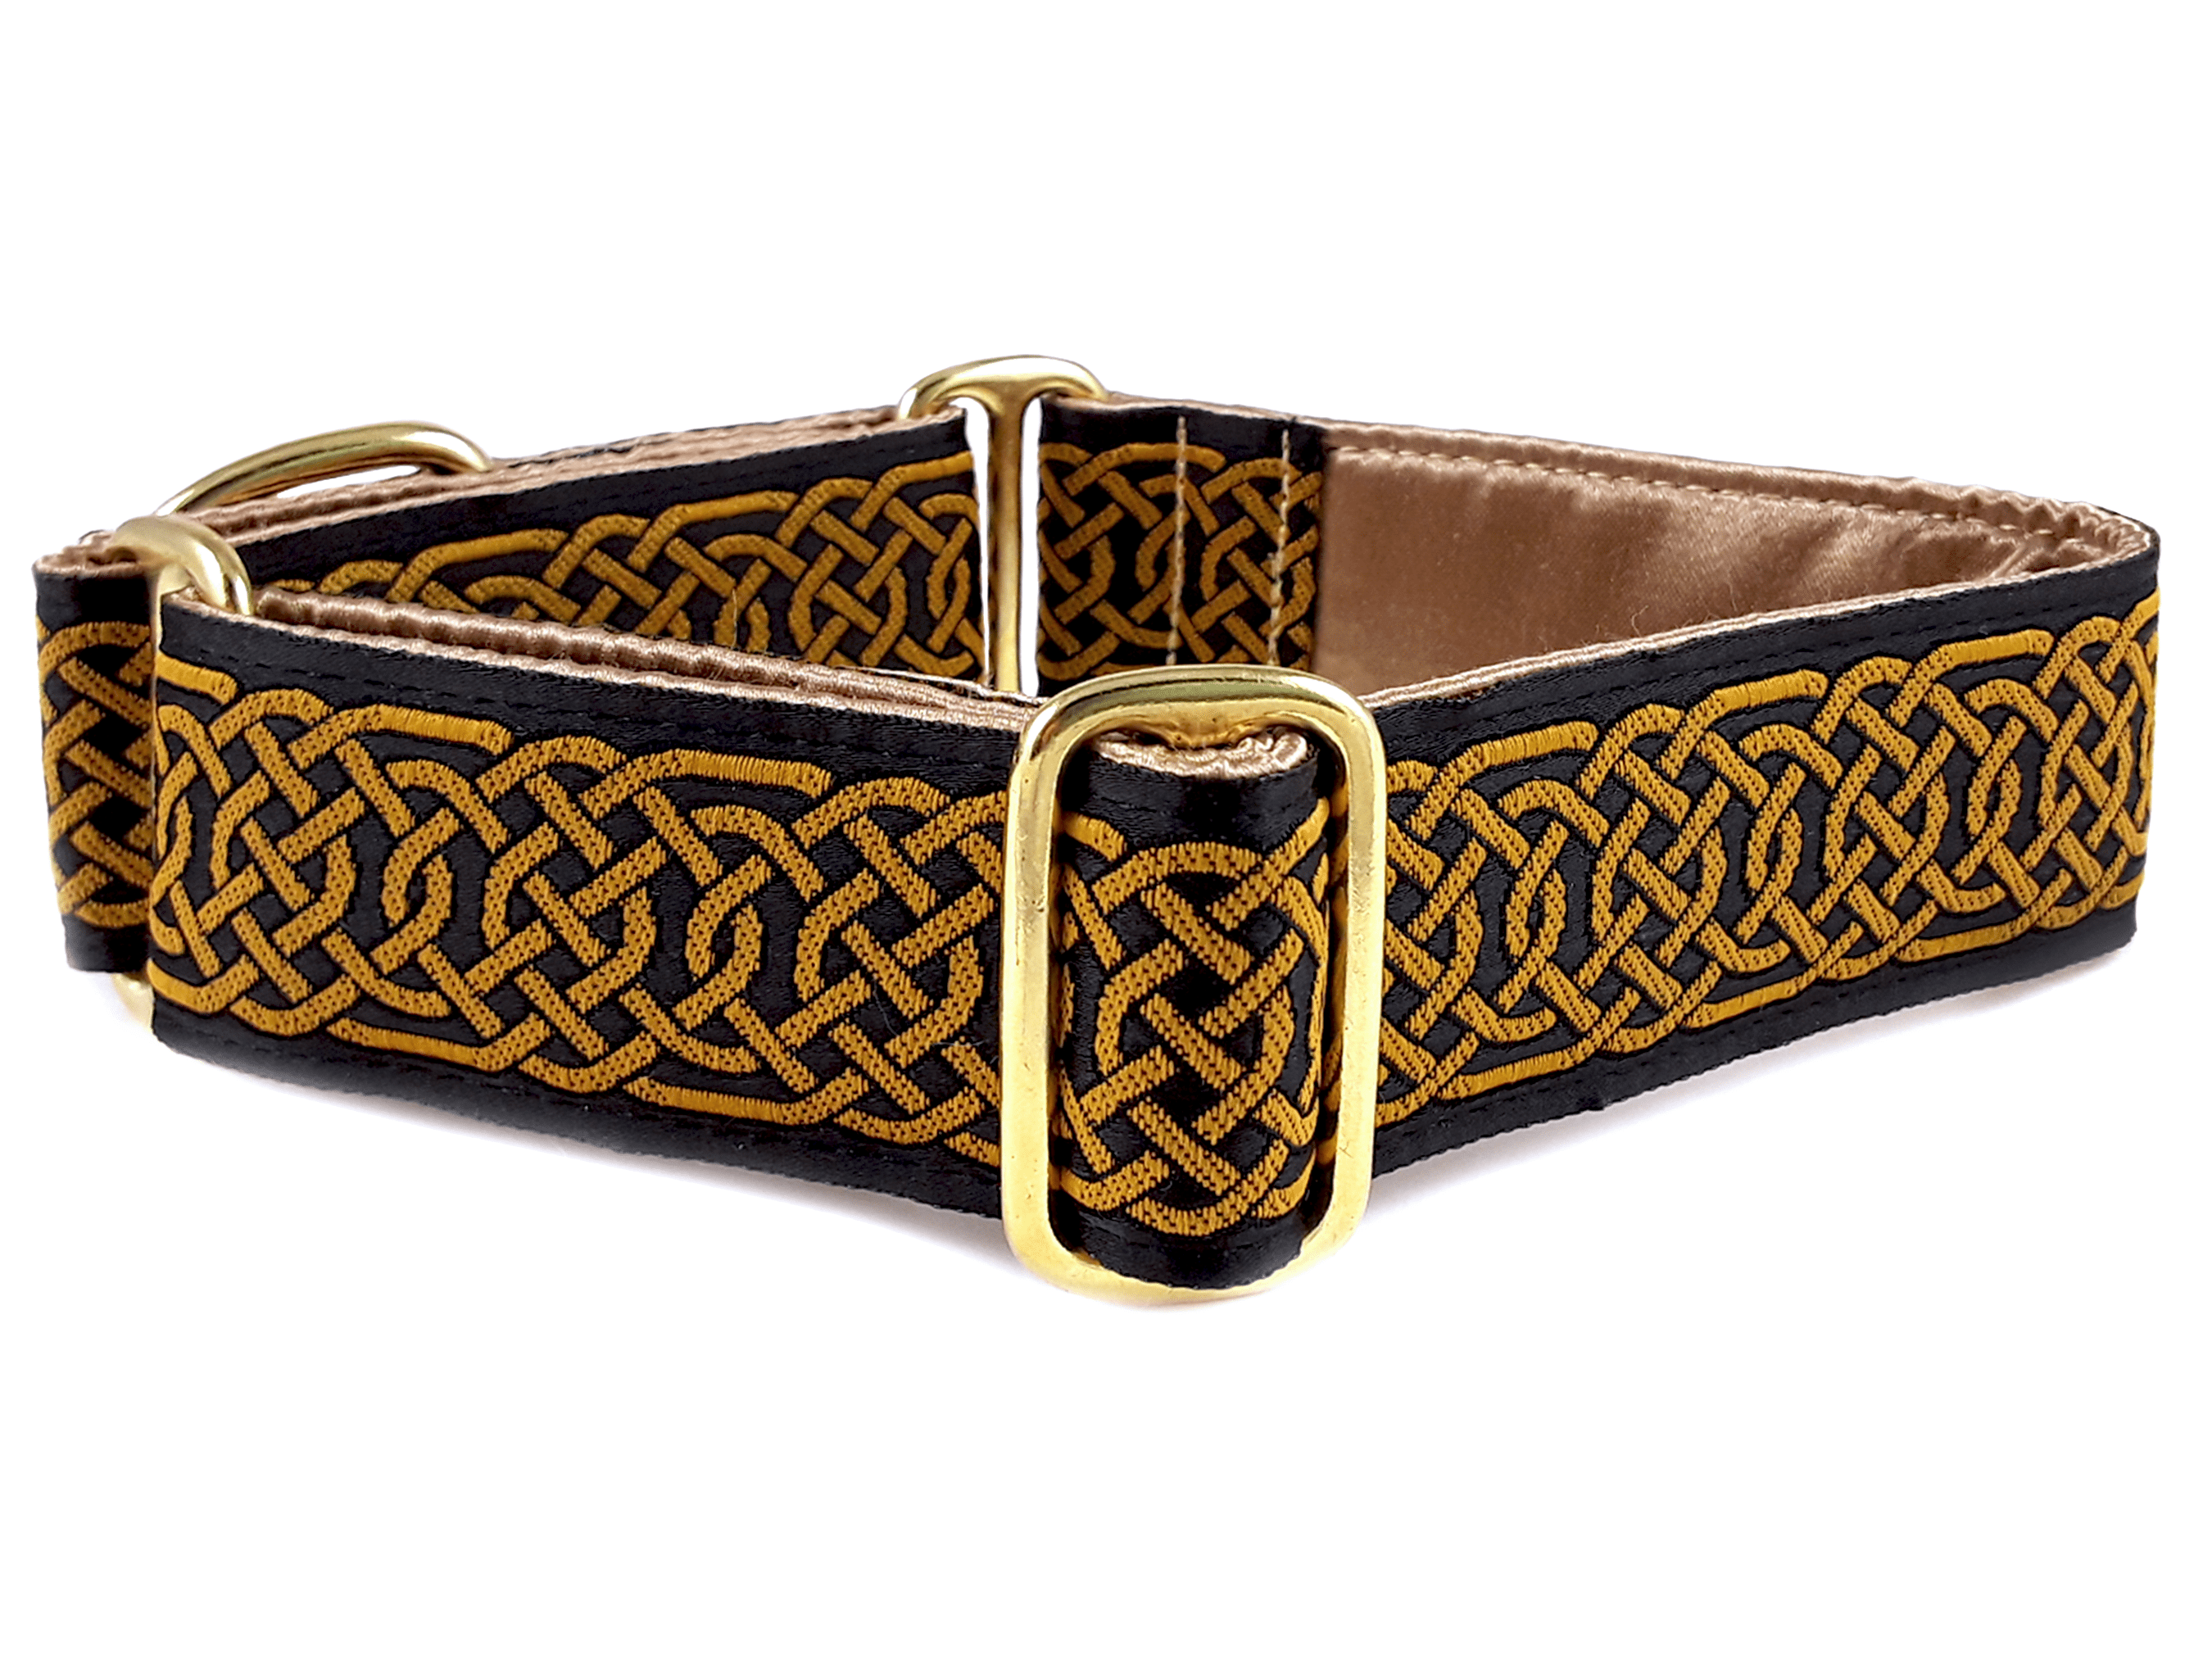 The Hound Haberdashery Collar Wexford Jacquard in Gold & Black - Martingale Dog Collar or Buckle Dog Collar - 1.5" Width